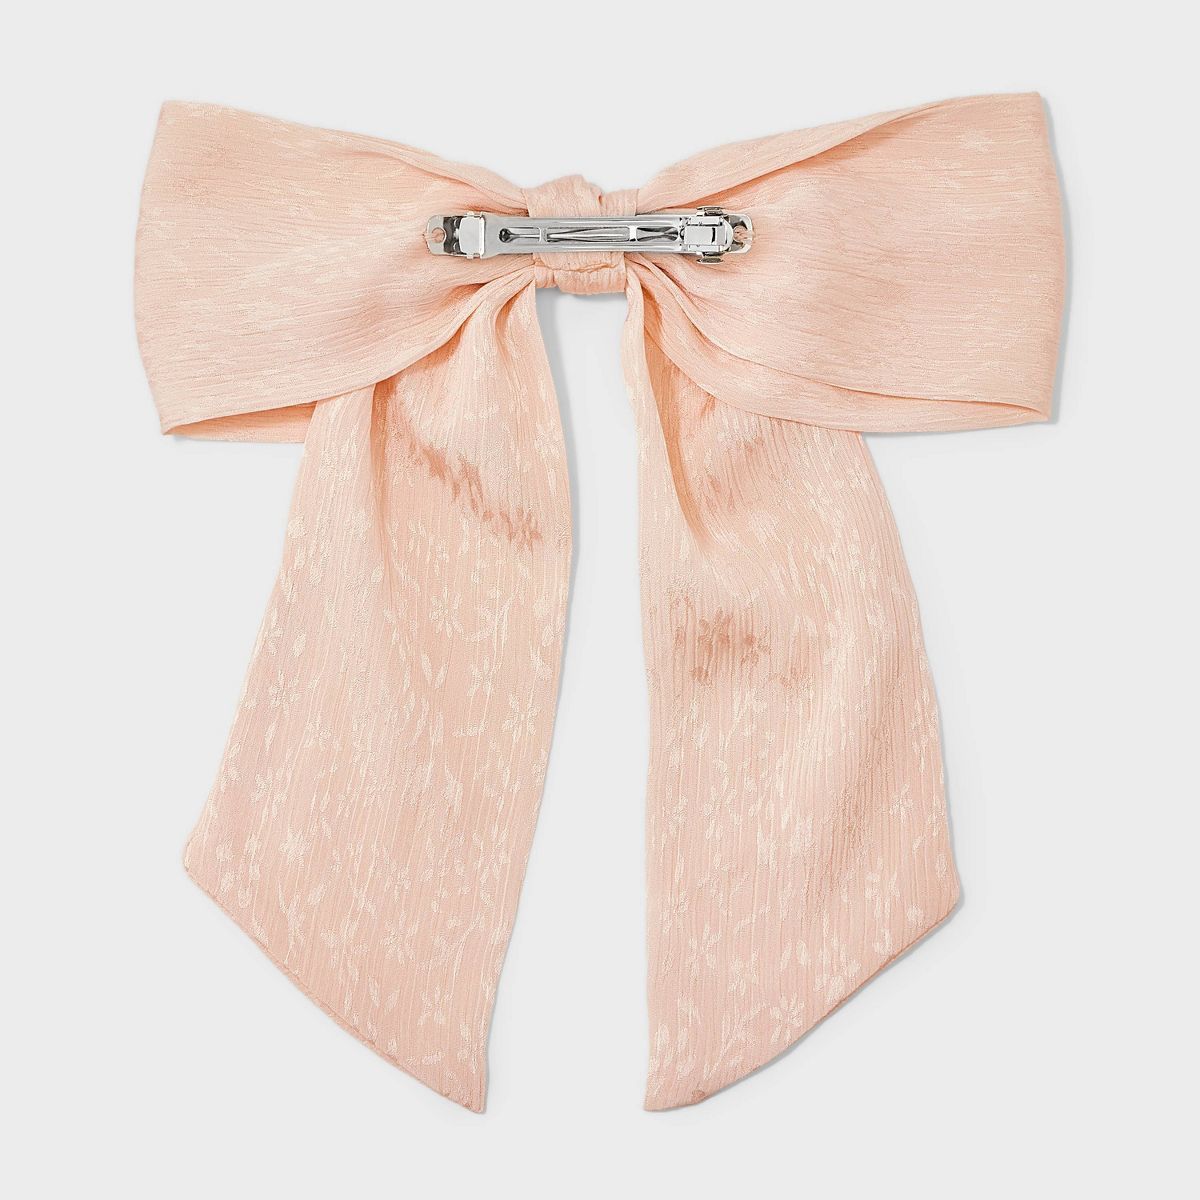 Floral Chiffon Hair Bow Barrette - A New Day™ Pink | Target